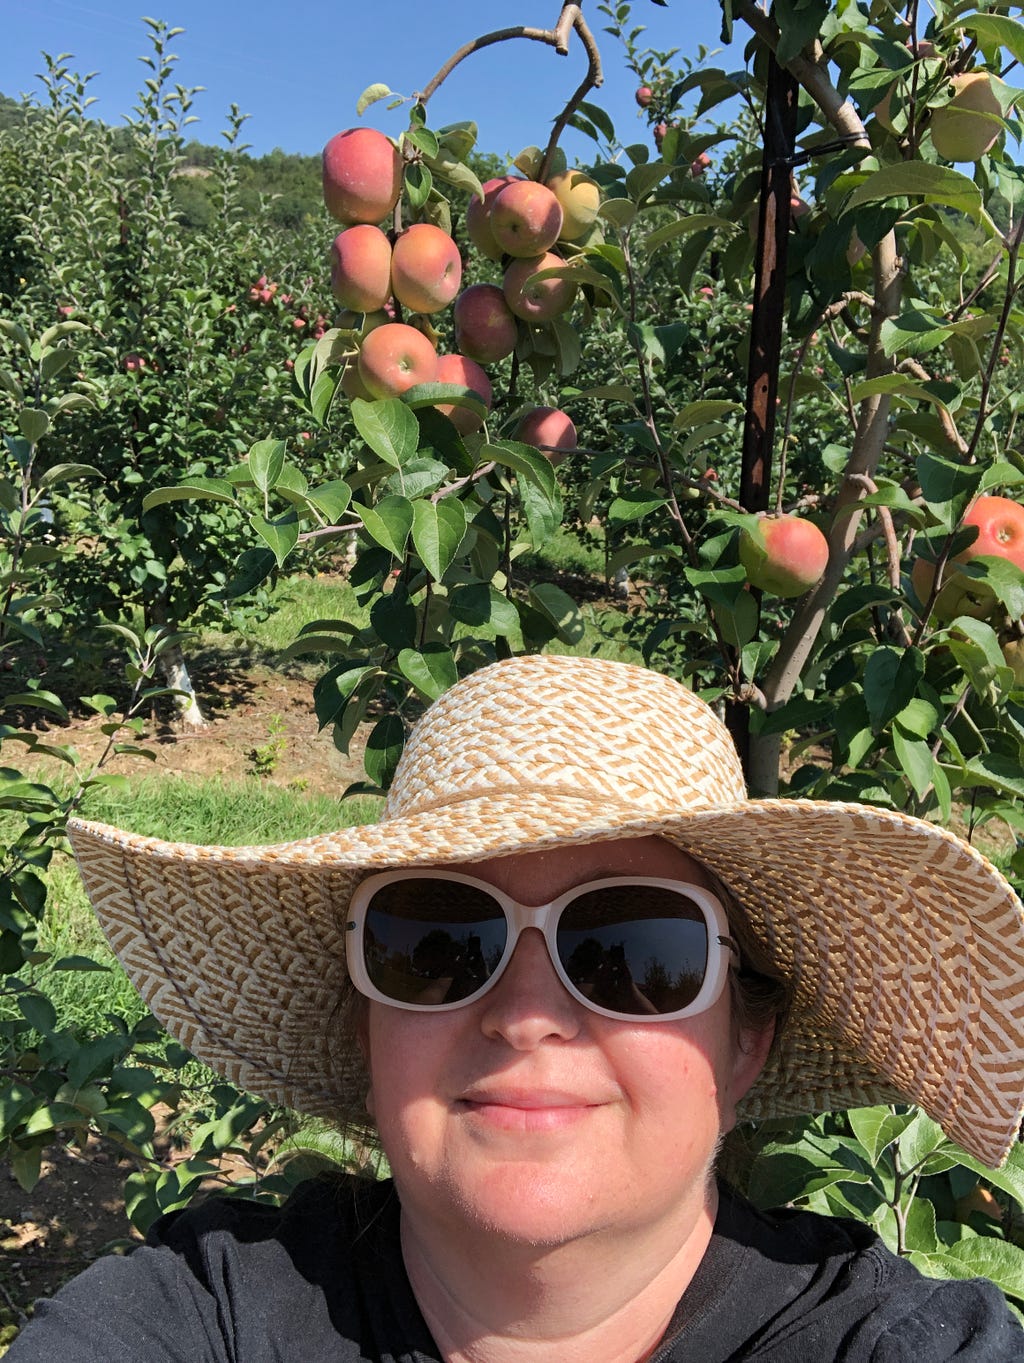 The author standing in front of her favorite apple tree.